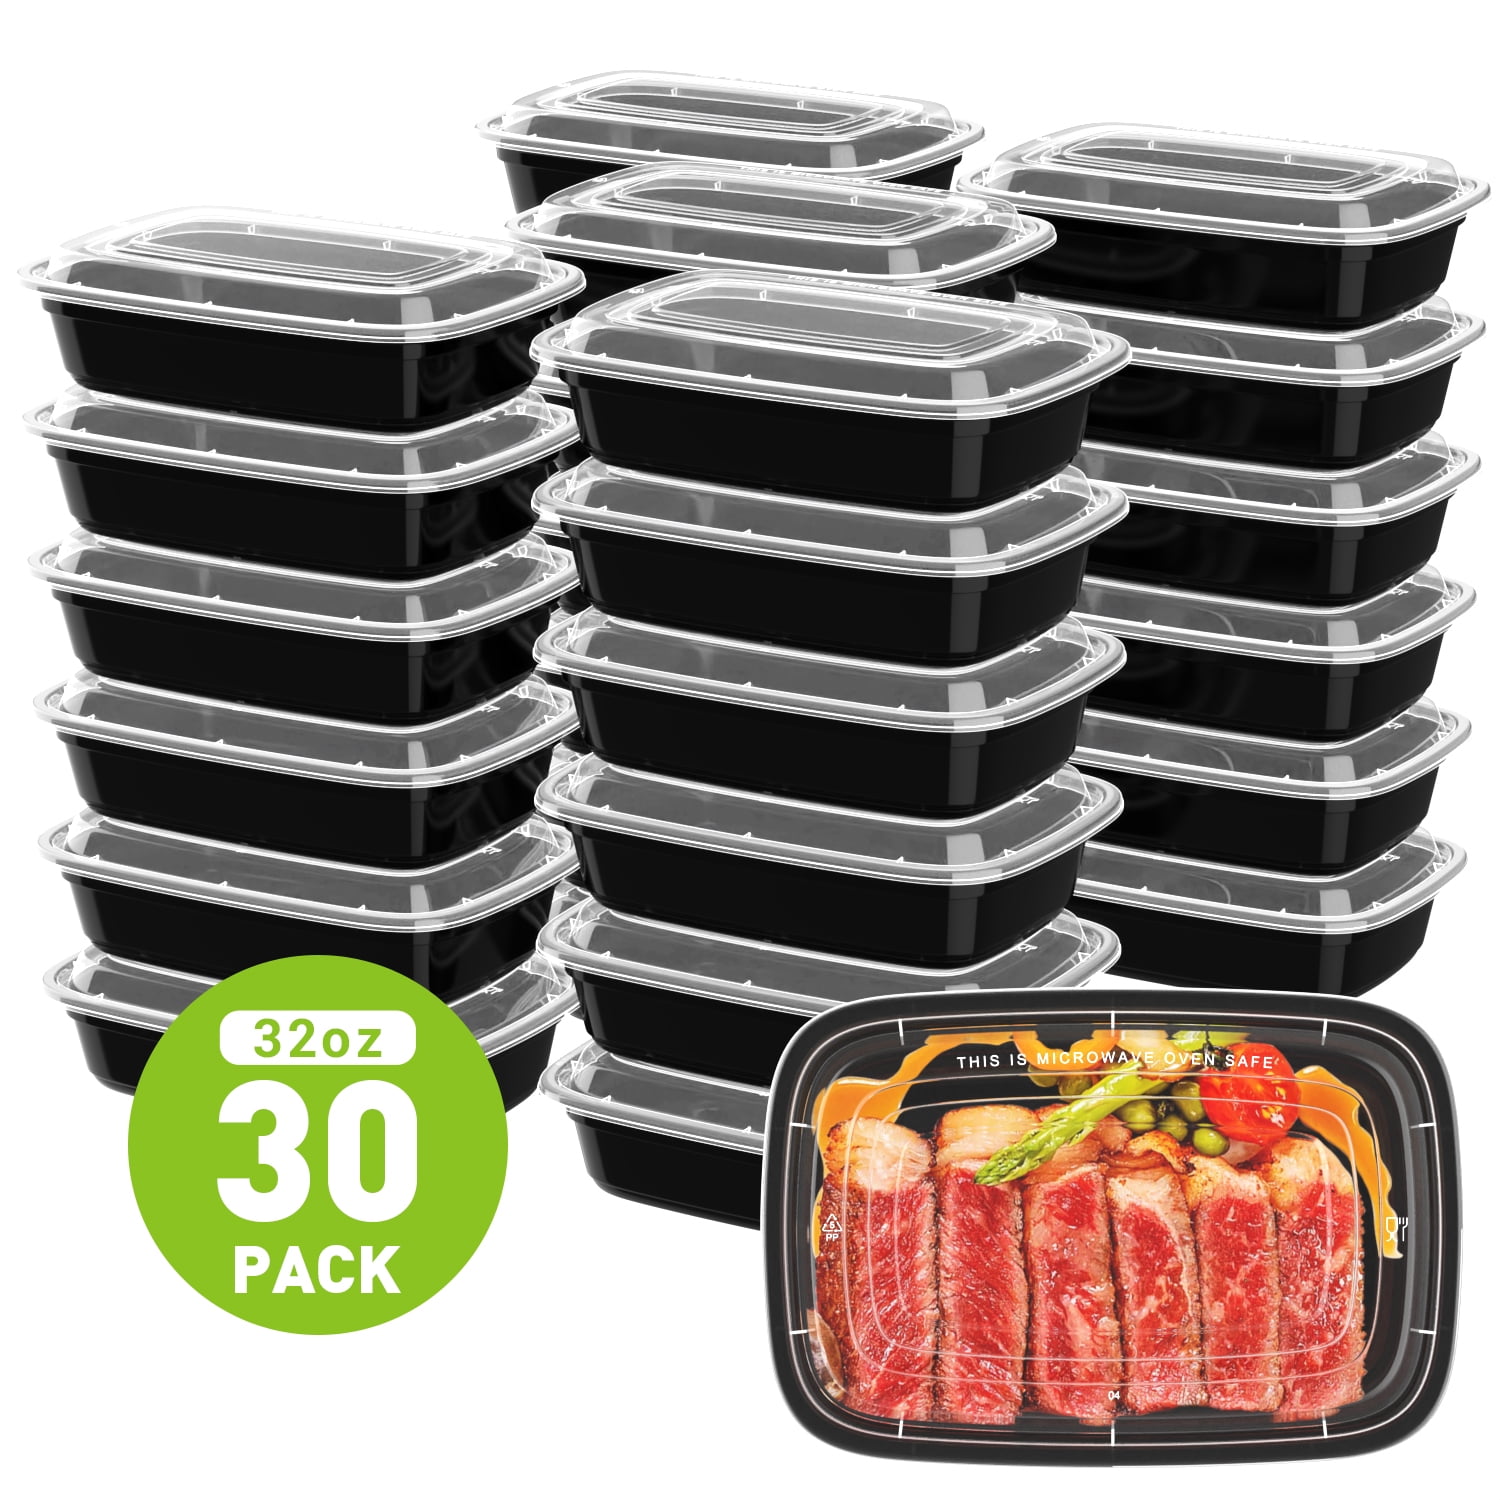 Mainstays 30 Piece 3 Compartment Meal Prep Food Storage Containers 